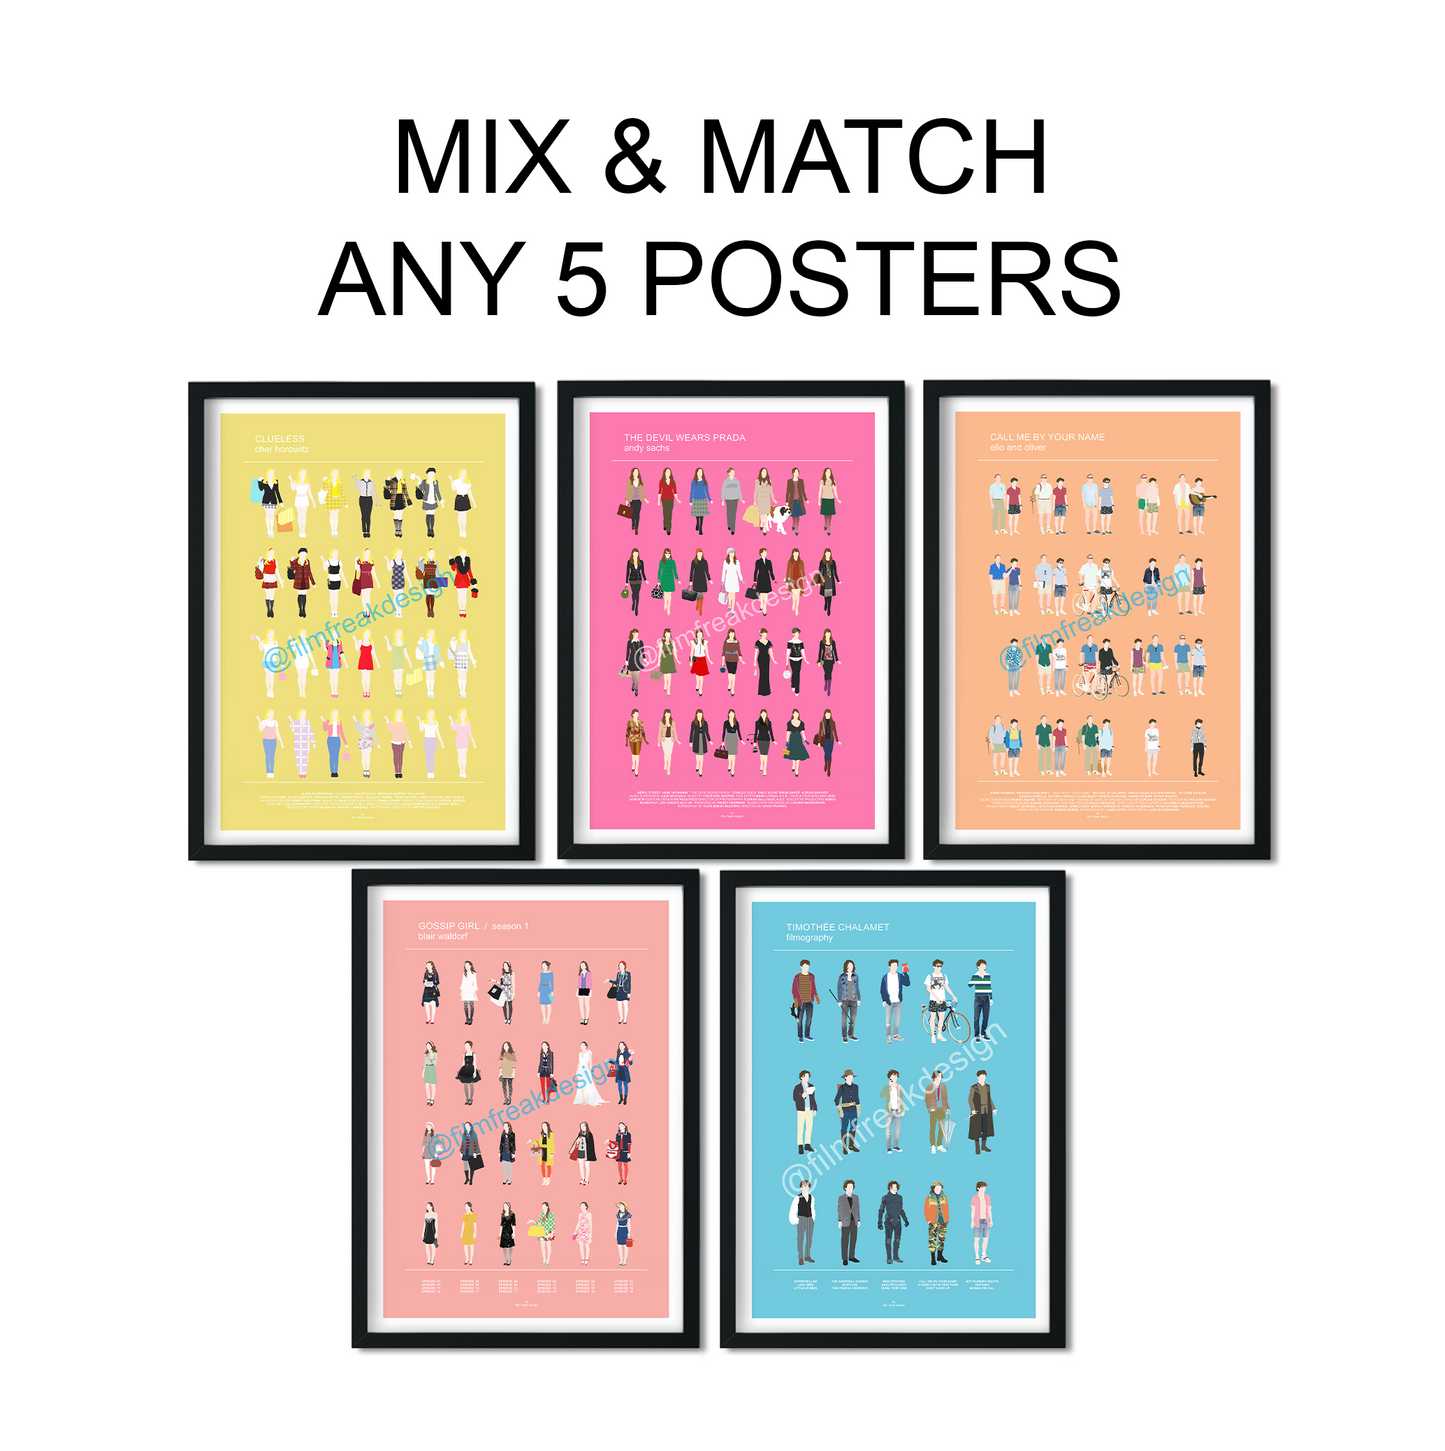 Mix and match set of 5 movie posters by Film Freak Design